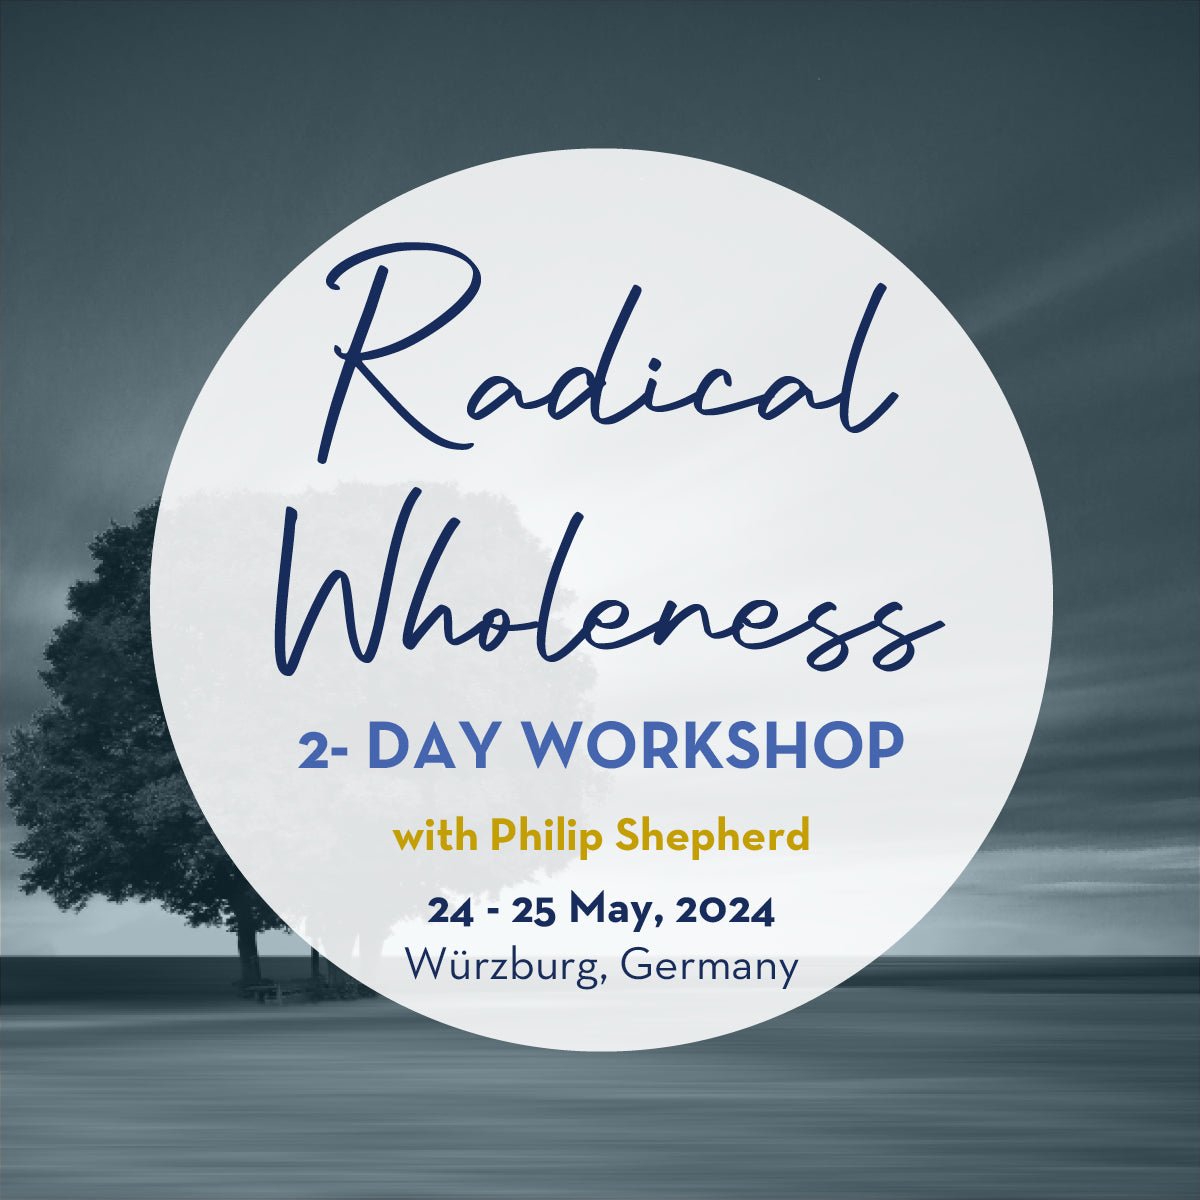 Radical Wholeness 2-Day Workshop: Würzburg, Germany - The Embodied Present Process